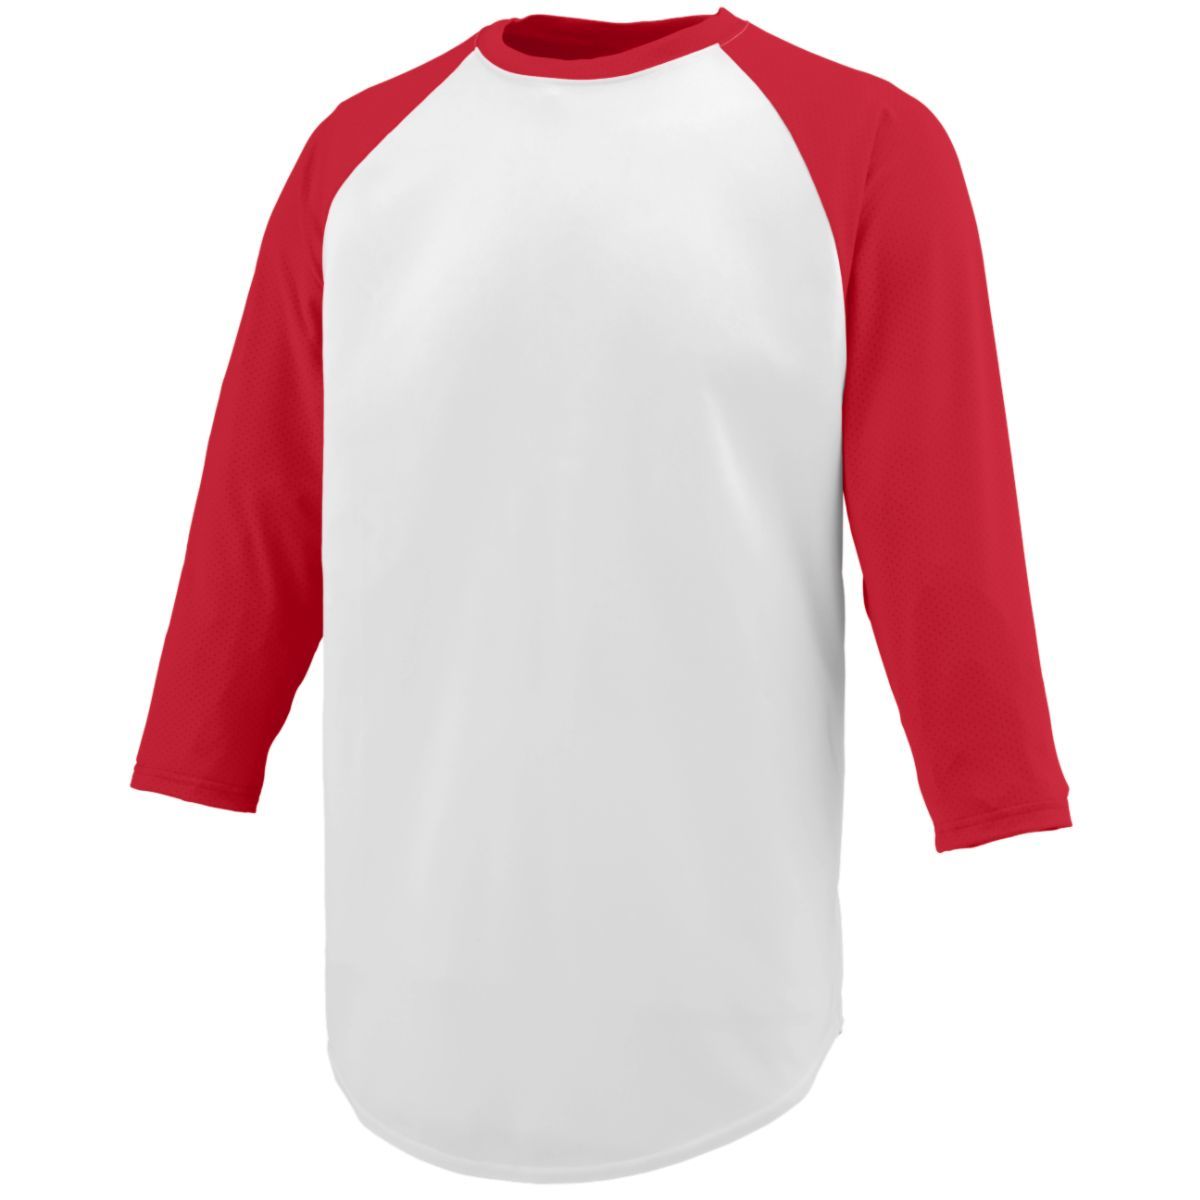 Augusta Sportswear Nova Jersey in White/Red  -Part of the Adult, Adult-Jersey, Augusta-Products, Baseball, Shirts, All-Sports, All-Sports-1 product lines at KanaleyCreations.com